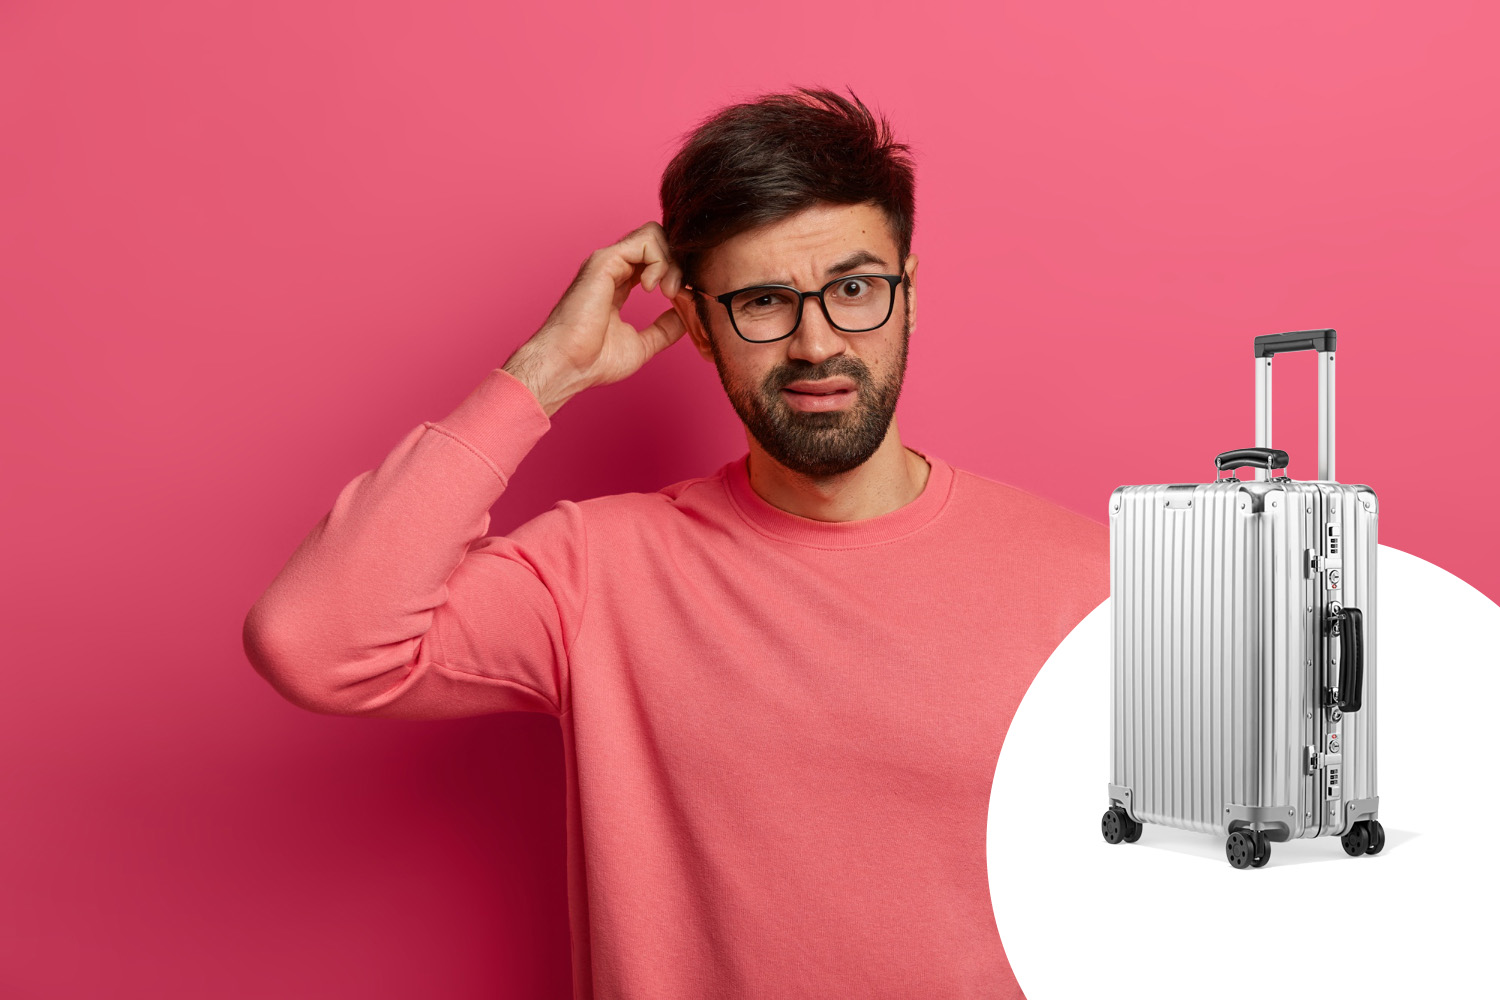 How to buy a Rimowa suitcase in 2021